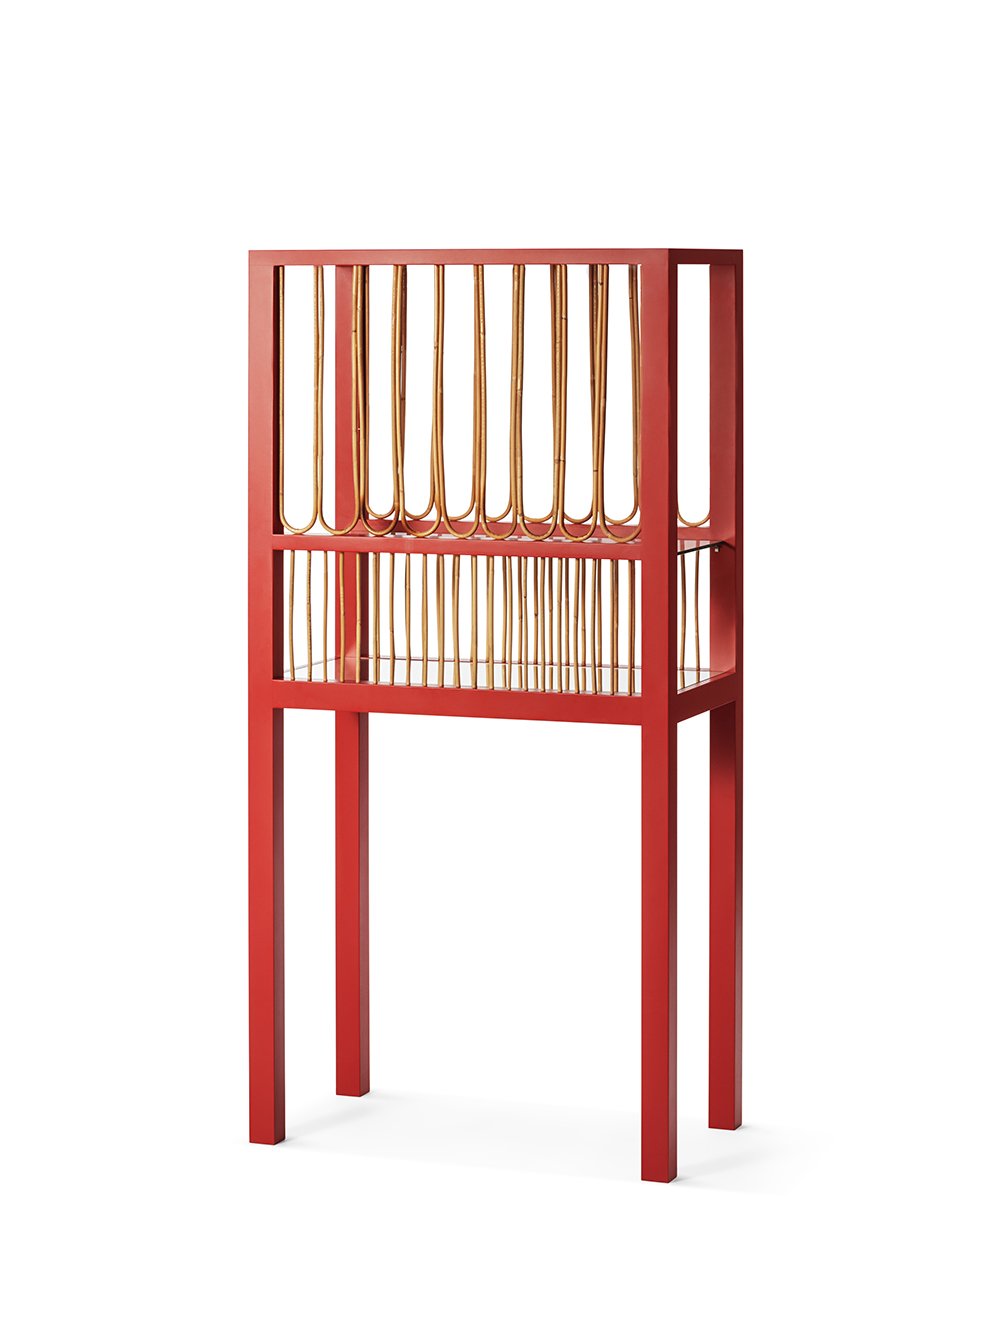 Wooden, rattan and glass Red Cabinetat 3daysofdesign